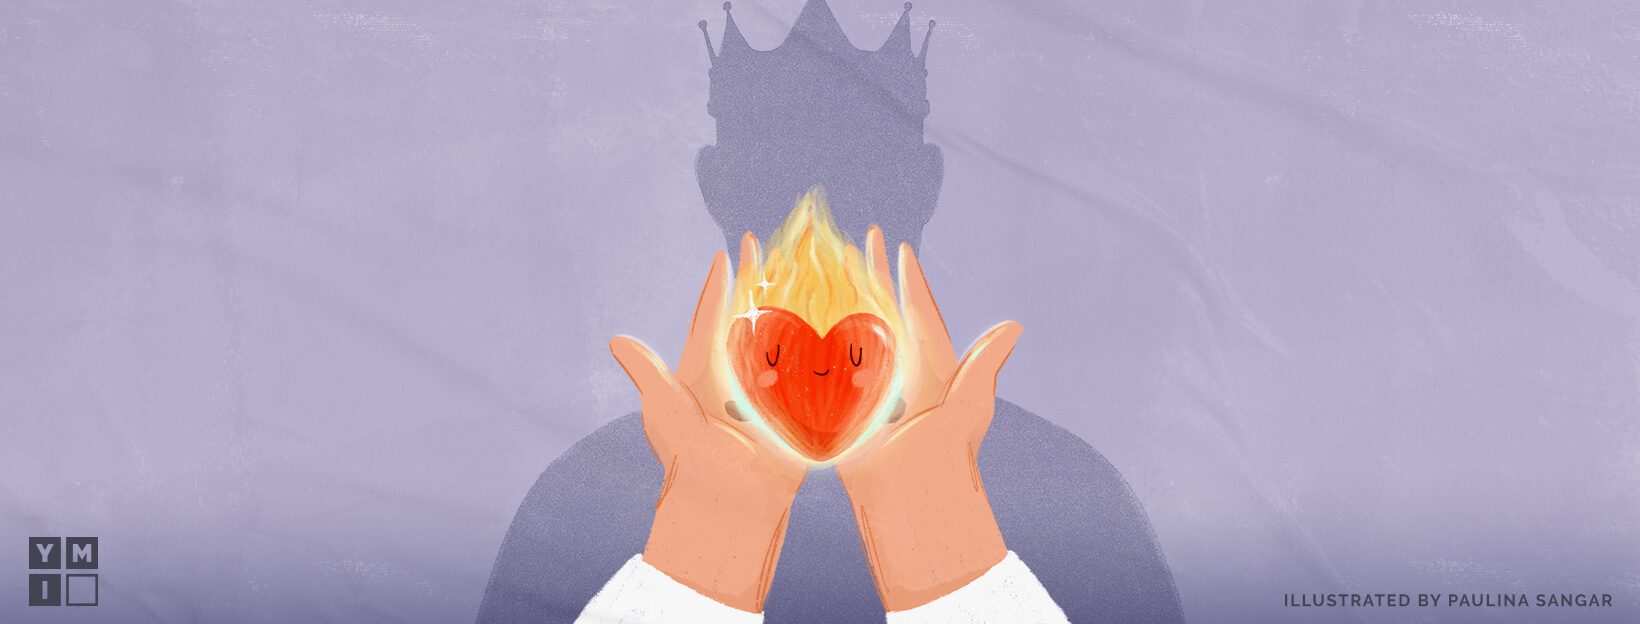 Illustration of Jesus' hand holding our burning hearts with His shadow on the wall